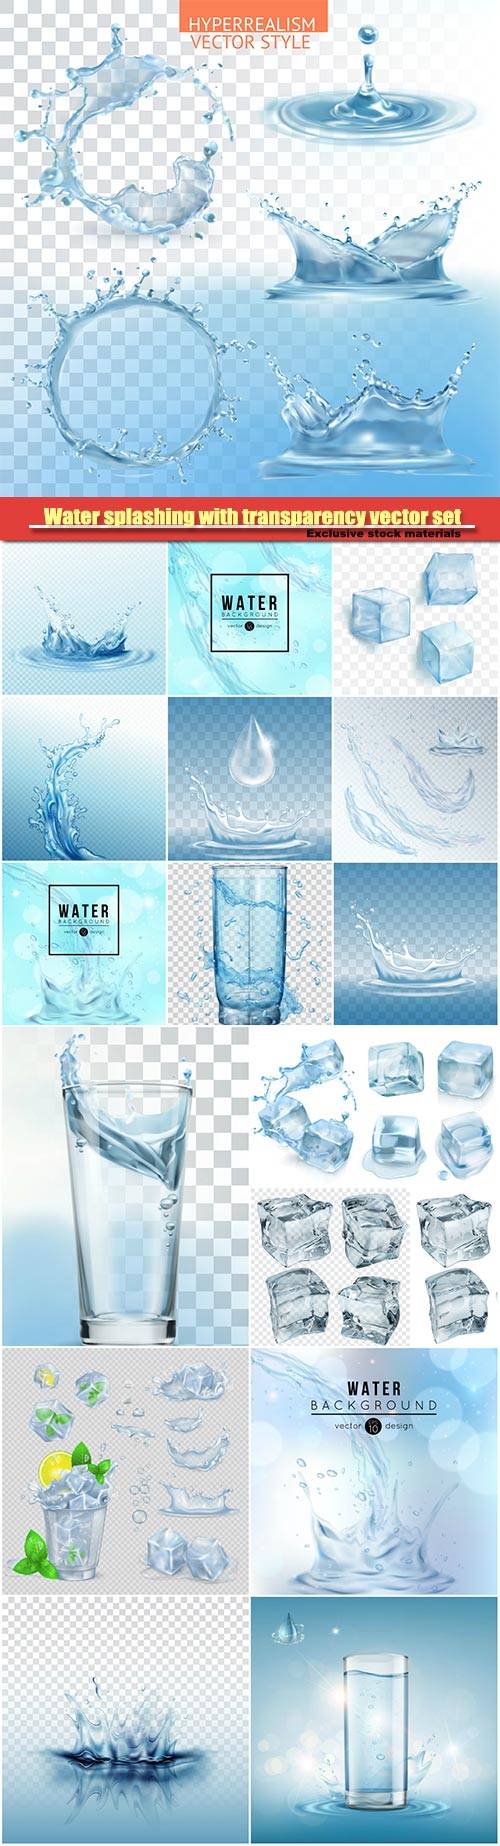 Water splashing with transparency vector set, glass with water, green mint leaves and ice cubes